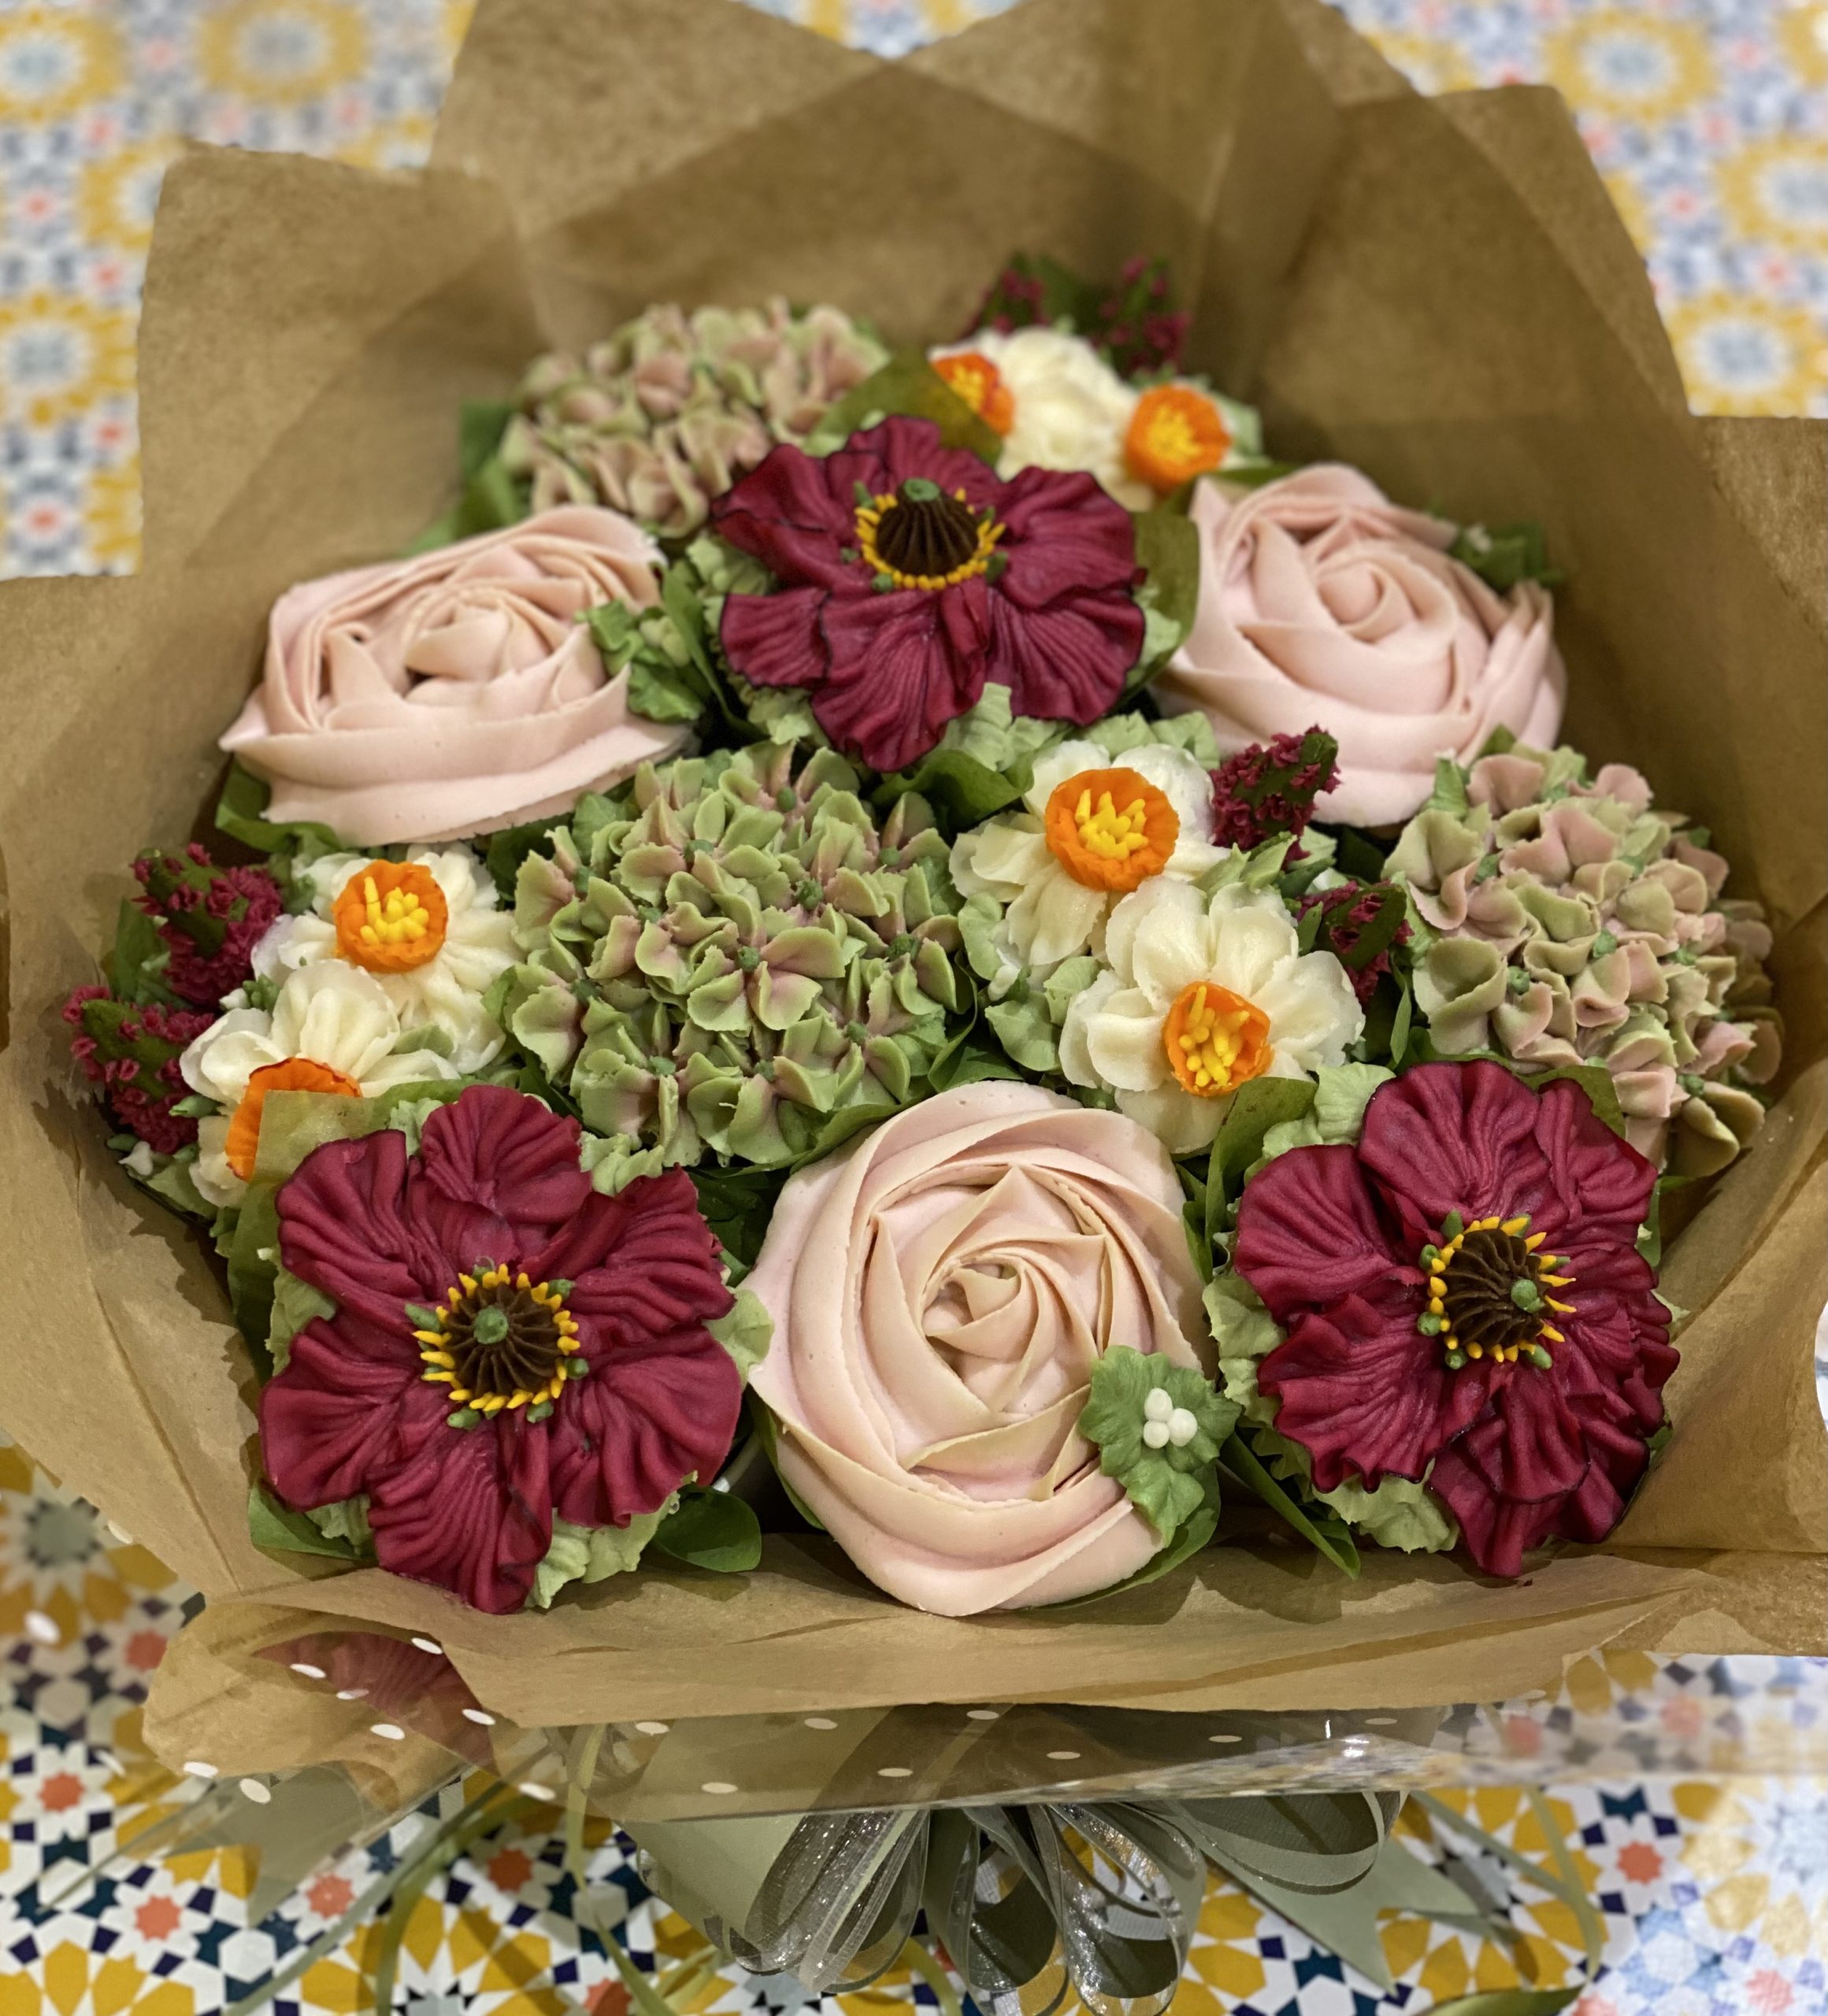 cakes by the bunch, cupcake bouquets, cupcake flowers, buttercream flowers, North Abingdon, Oxfordshire